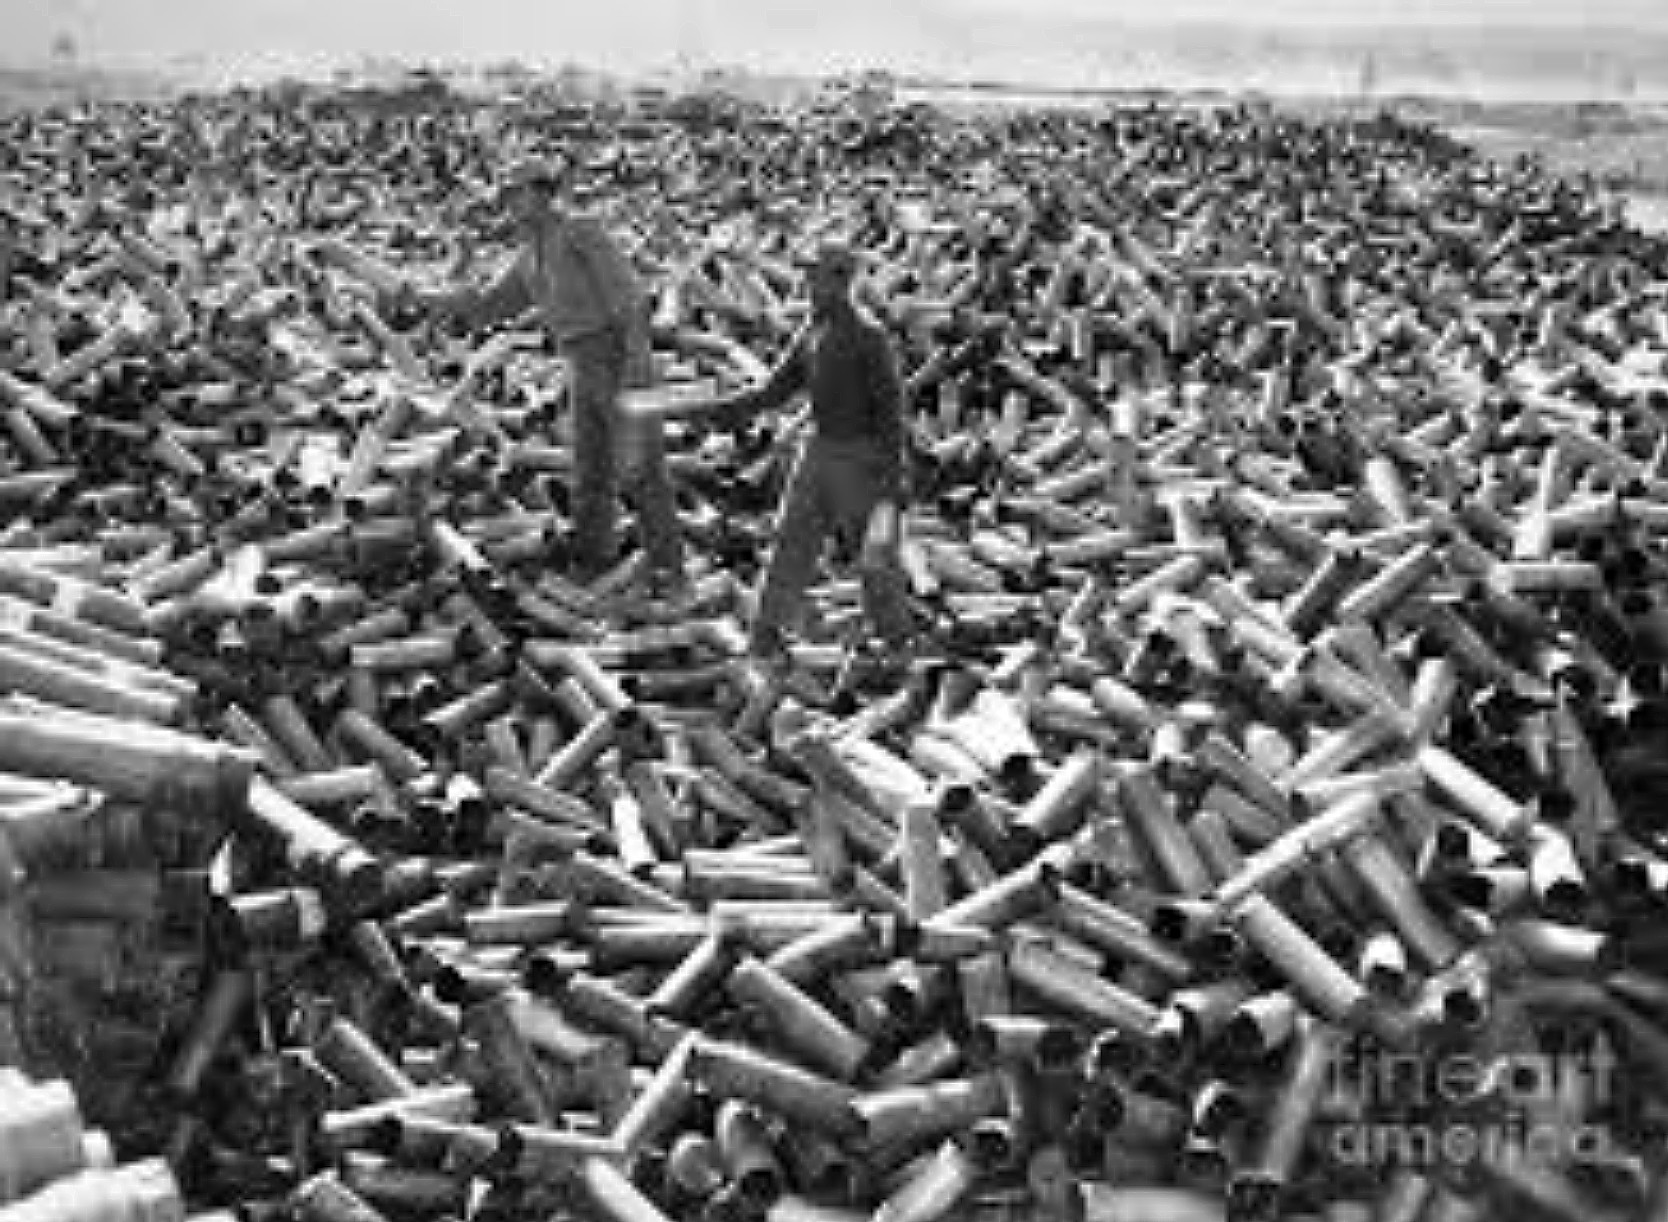 90 000 rounds in a month = one every 30 seconds + plus incoming fire